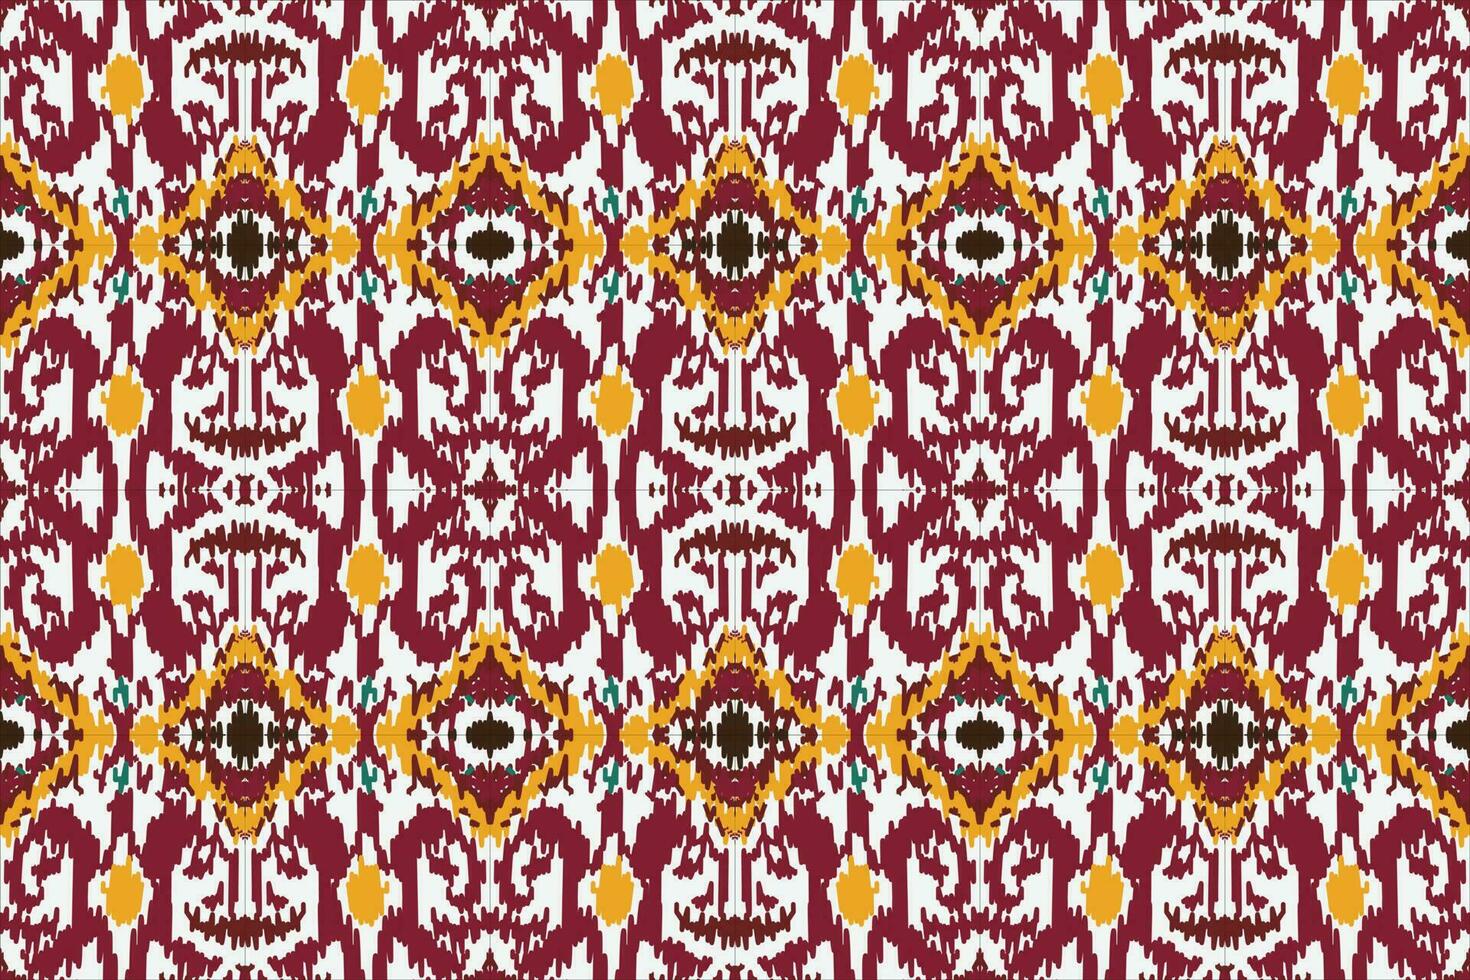 Motif Ikat floral paisley embroidery background. geometric ethnic oriental pattern traditional. Ikat Aztec style abstract vector illustration. design for print texture,fabric,saree,sari,carpet.